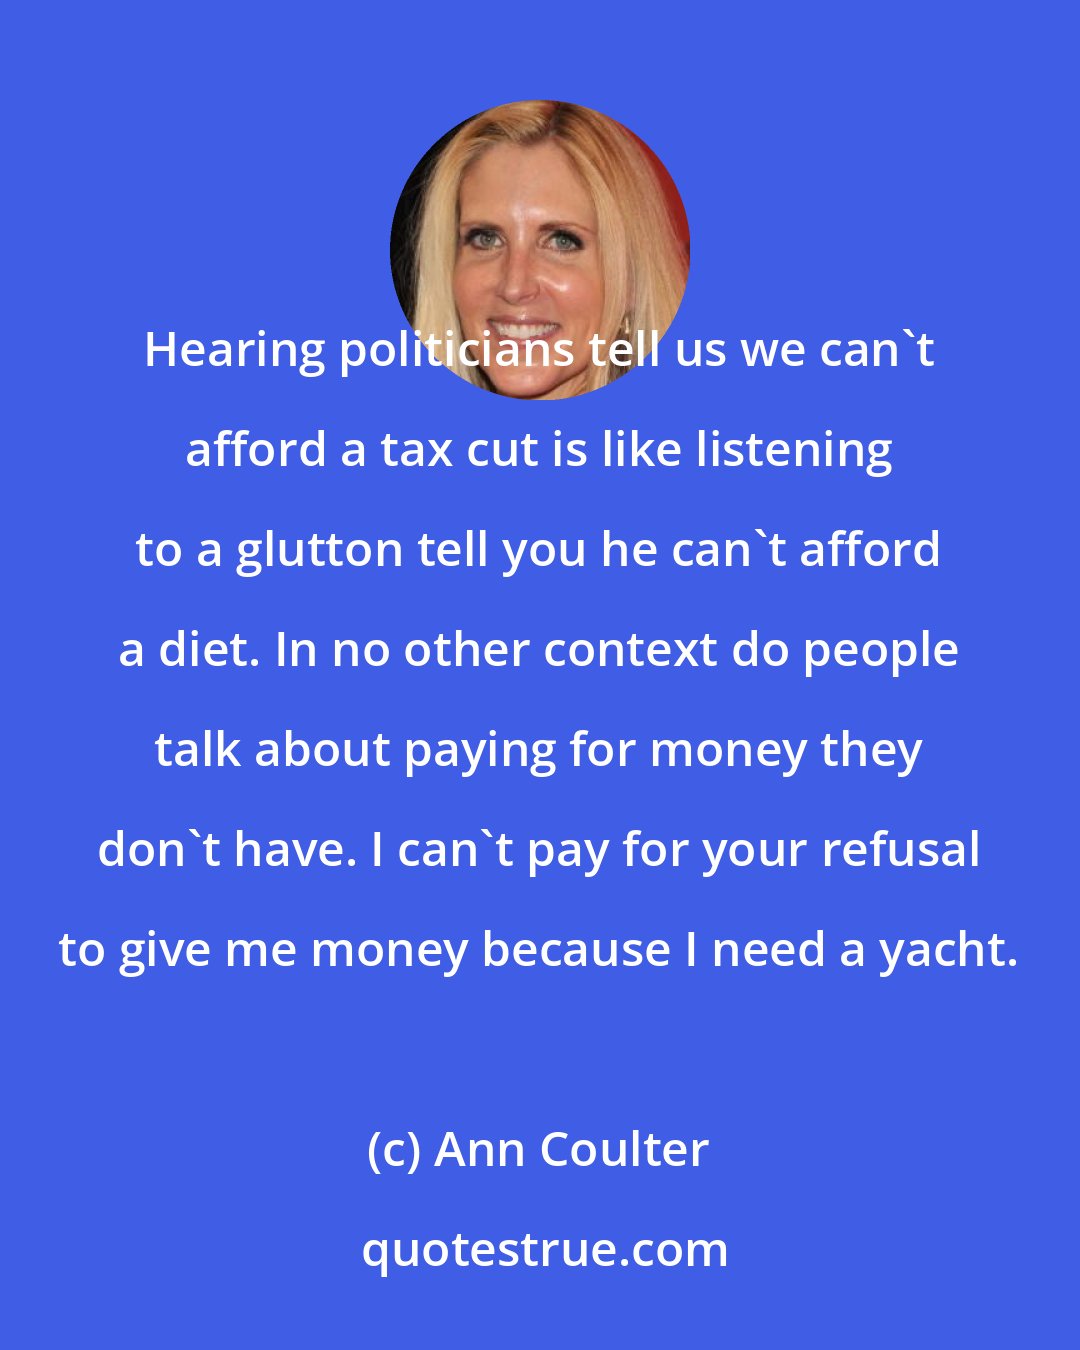 Ann Coulter: Hearing politicians tell us we can't afford a tax cut is like listening to a glutton tell you he can't afford a diet. In no other context do people talk about paying for money they don't have. I can't pay for your refusal to give me money because I need a yacht.